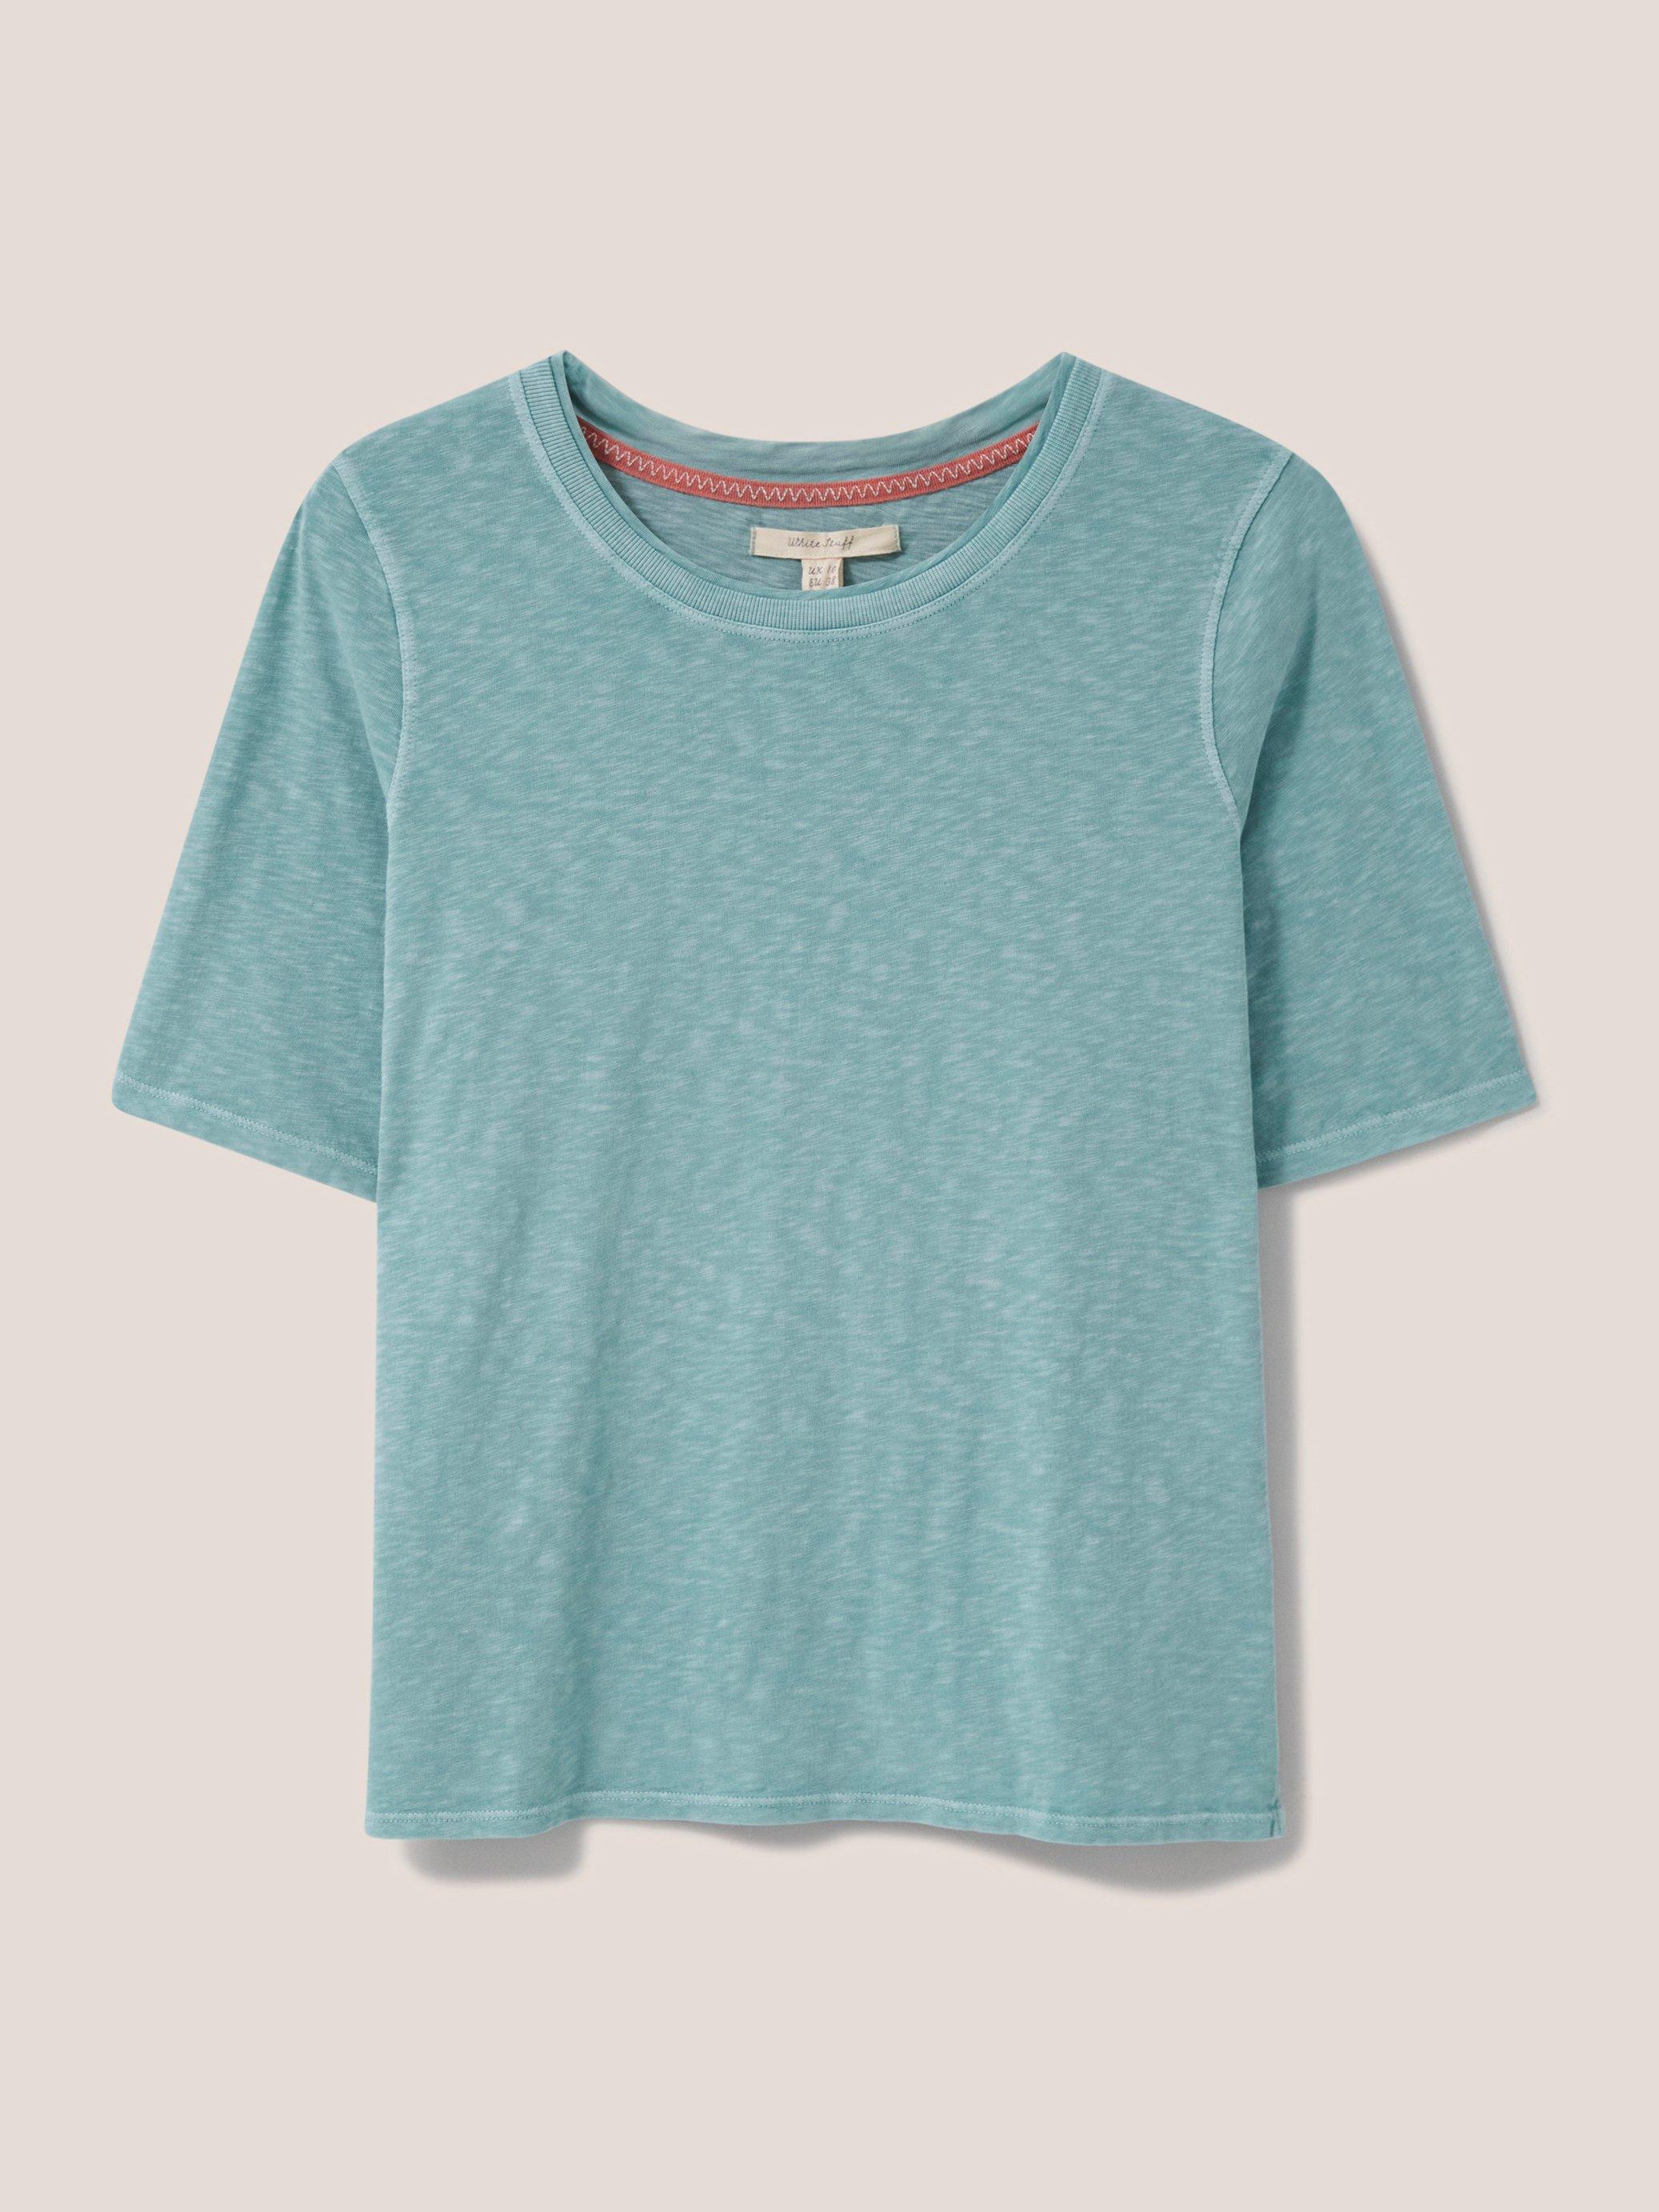 ANNABEL TEE in MID TEAL - FLAT FRONT